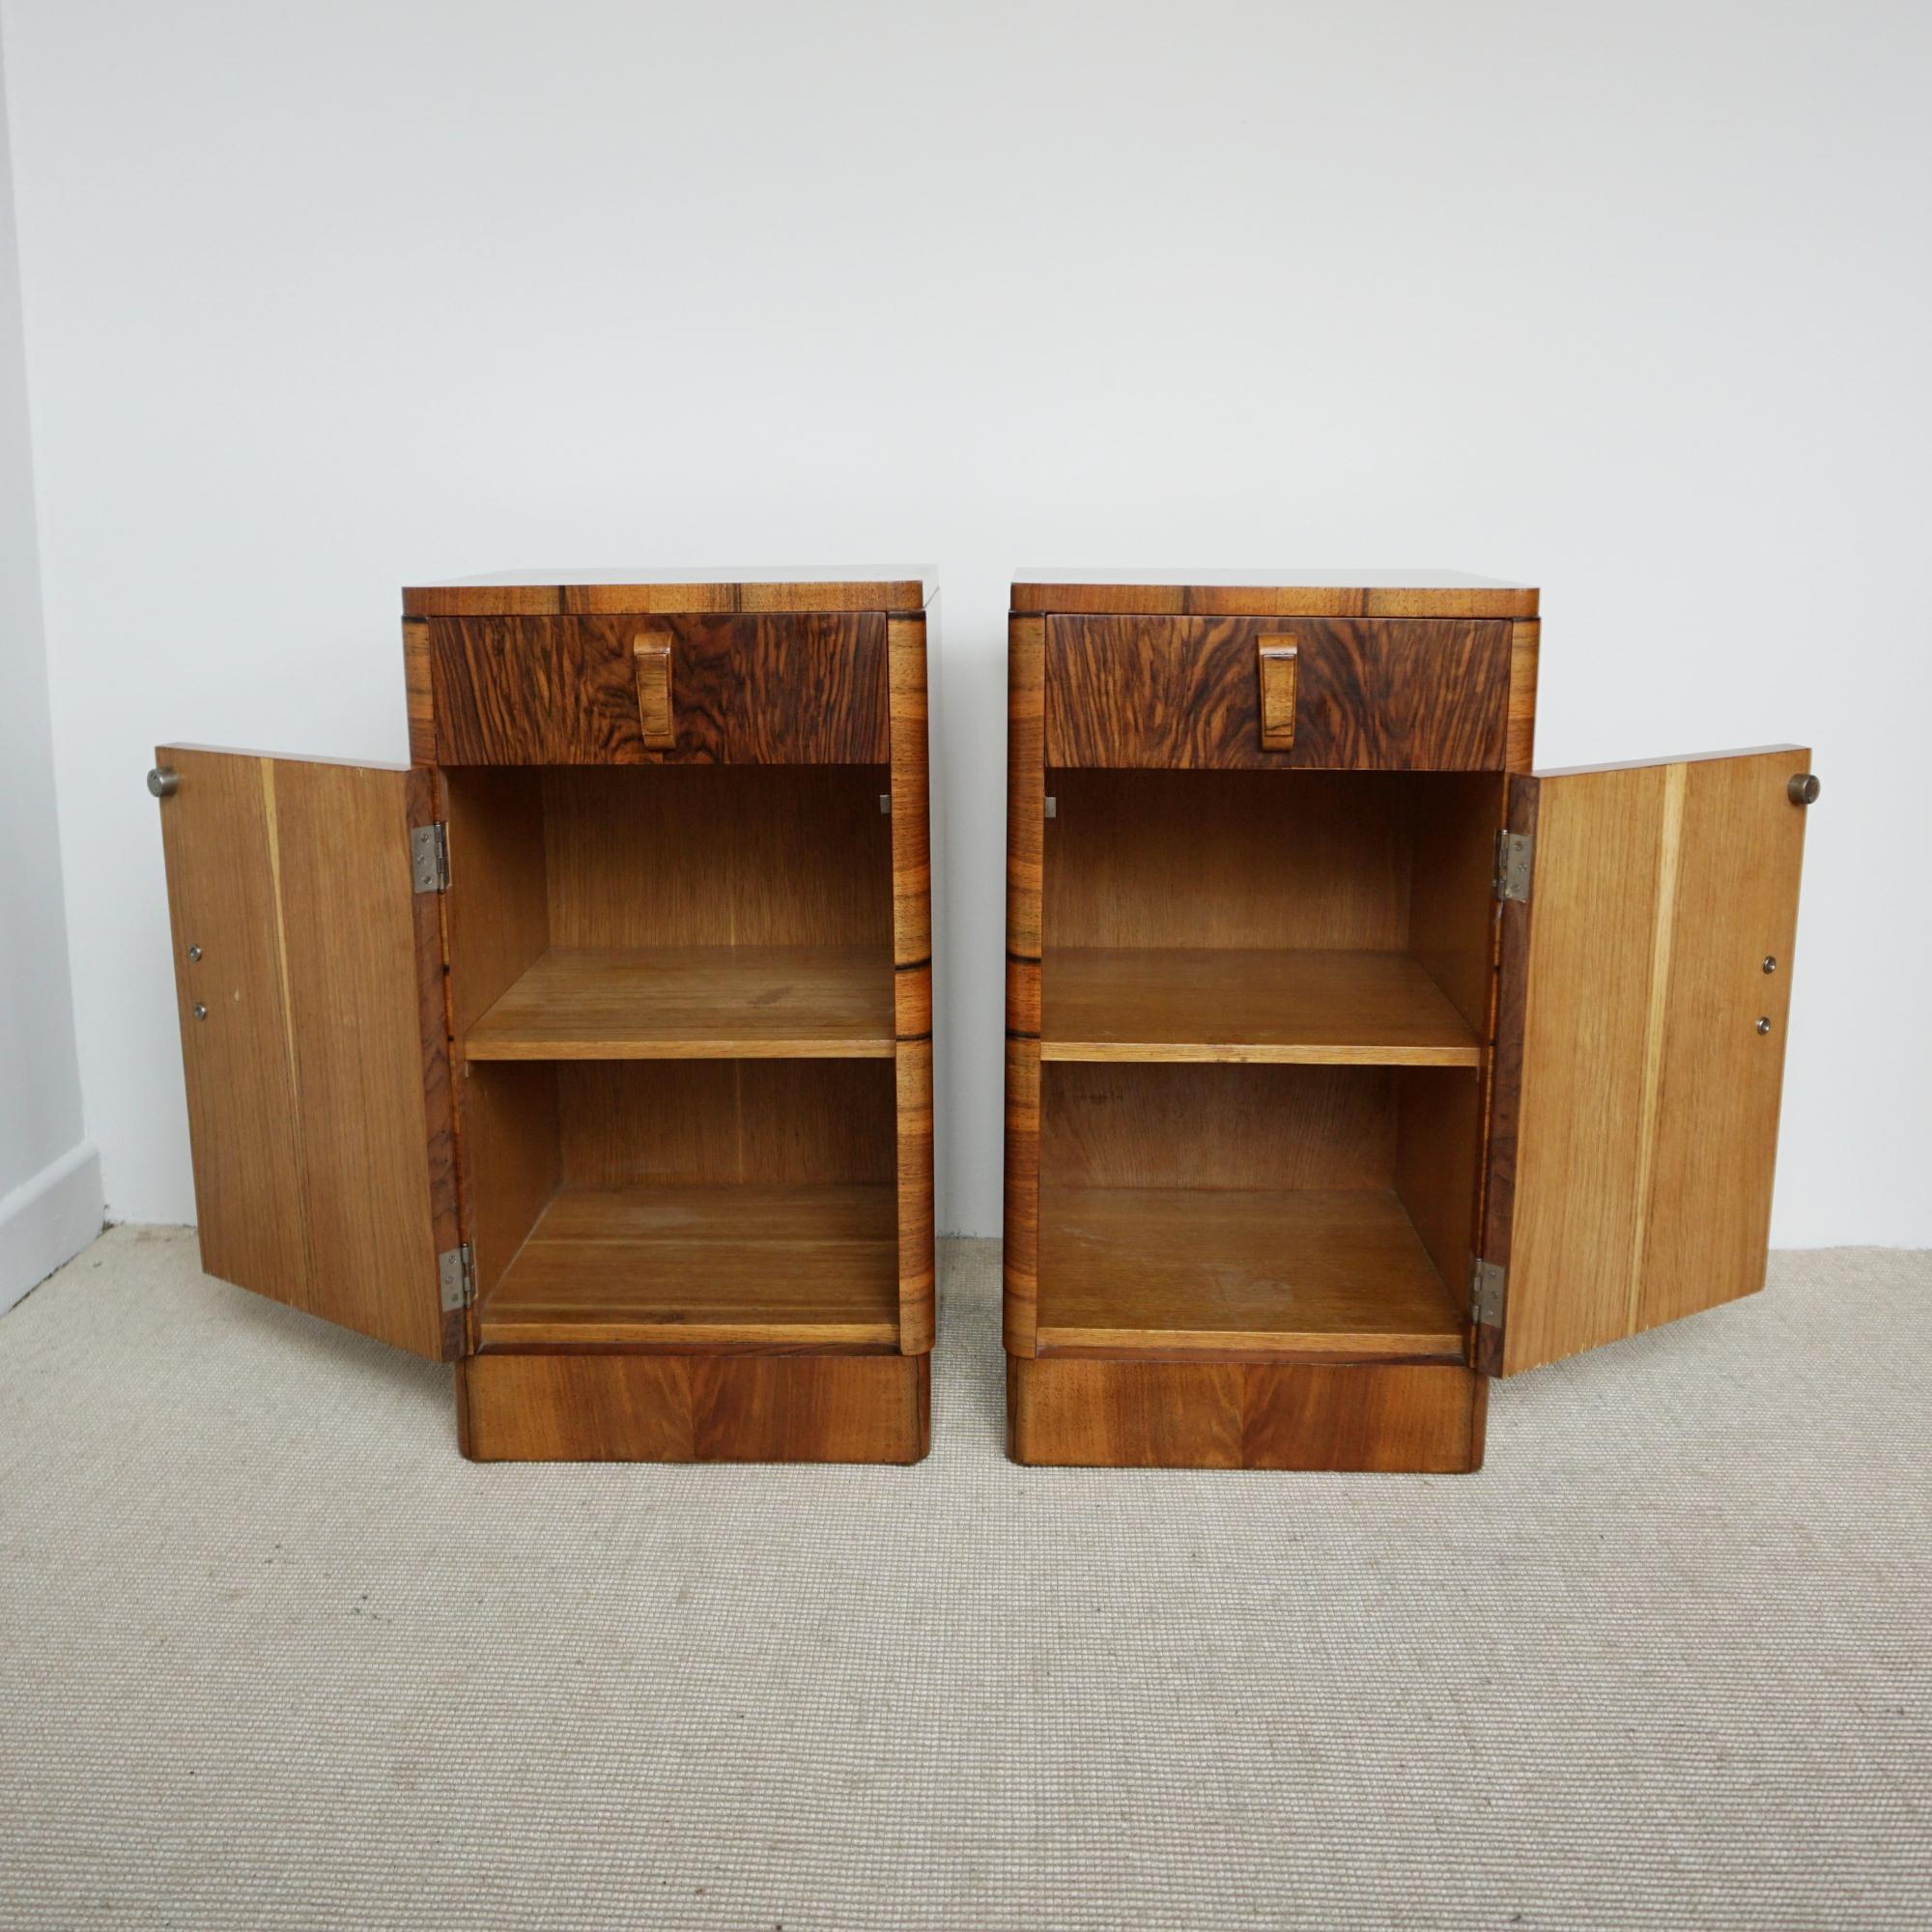 A pair of Art Deco bedside cabinets. Burr walnut veneered with figured walnut banding and original wooden handles. Drawer to top with shelved cabinet beneath.

Dimensions: H 66cm, W 39cm, D 38cm

Origin: English

Date: Circa 1930

Item No: 2003242

